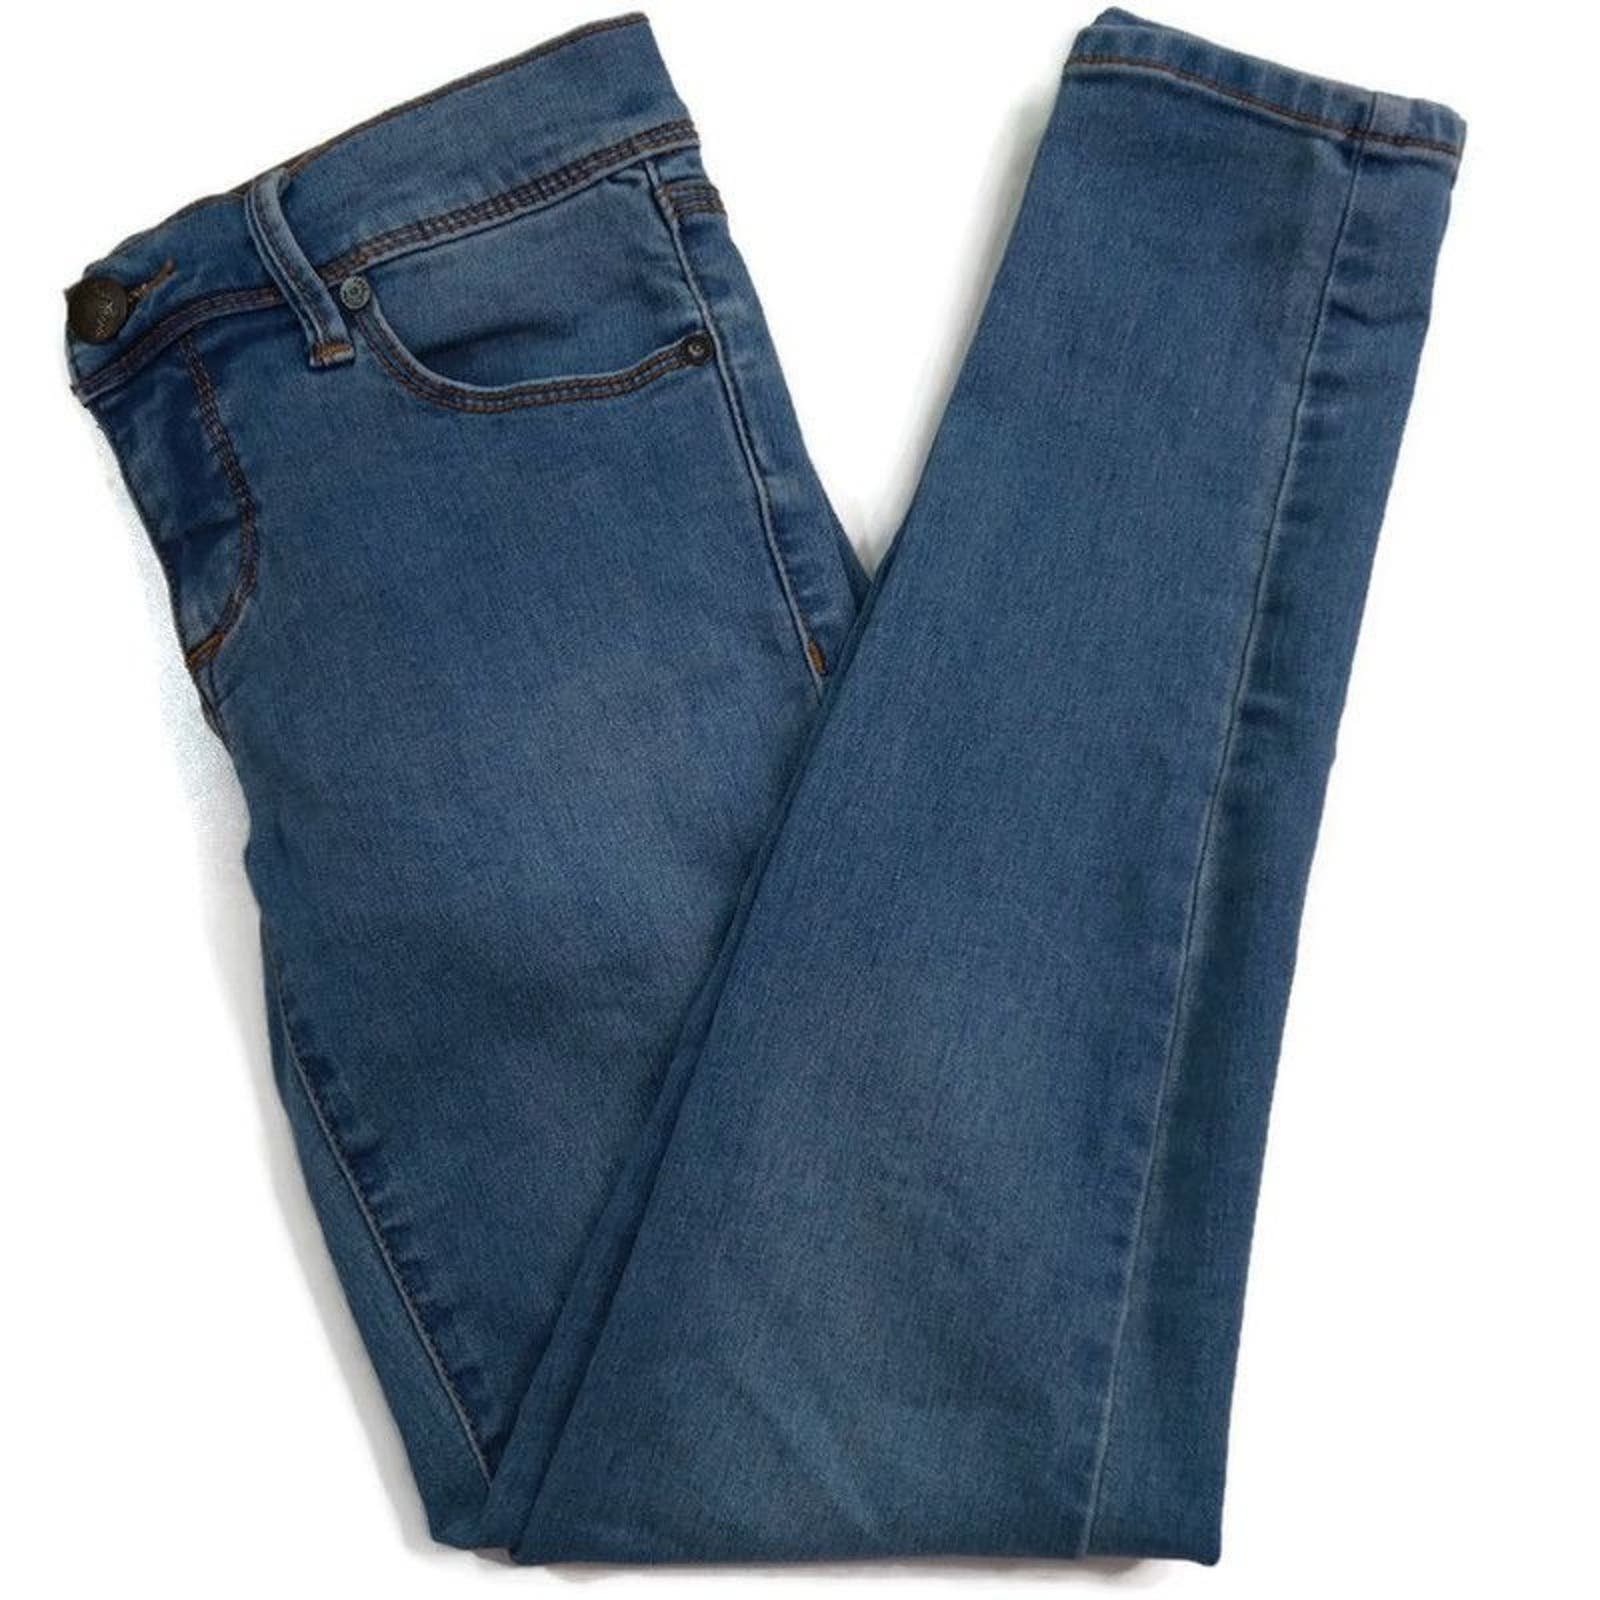 the Lowest price Free People Skinny Jeans size 25 fHNJI4fvl Store Online